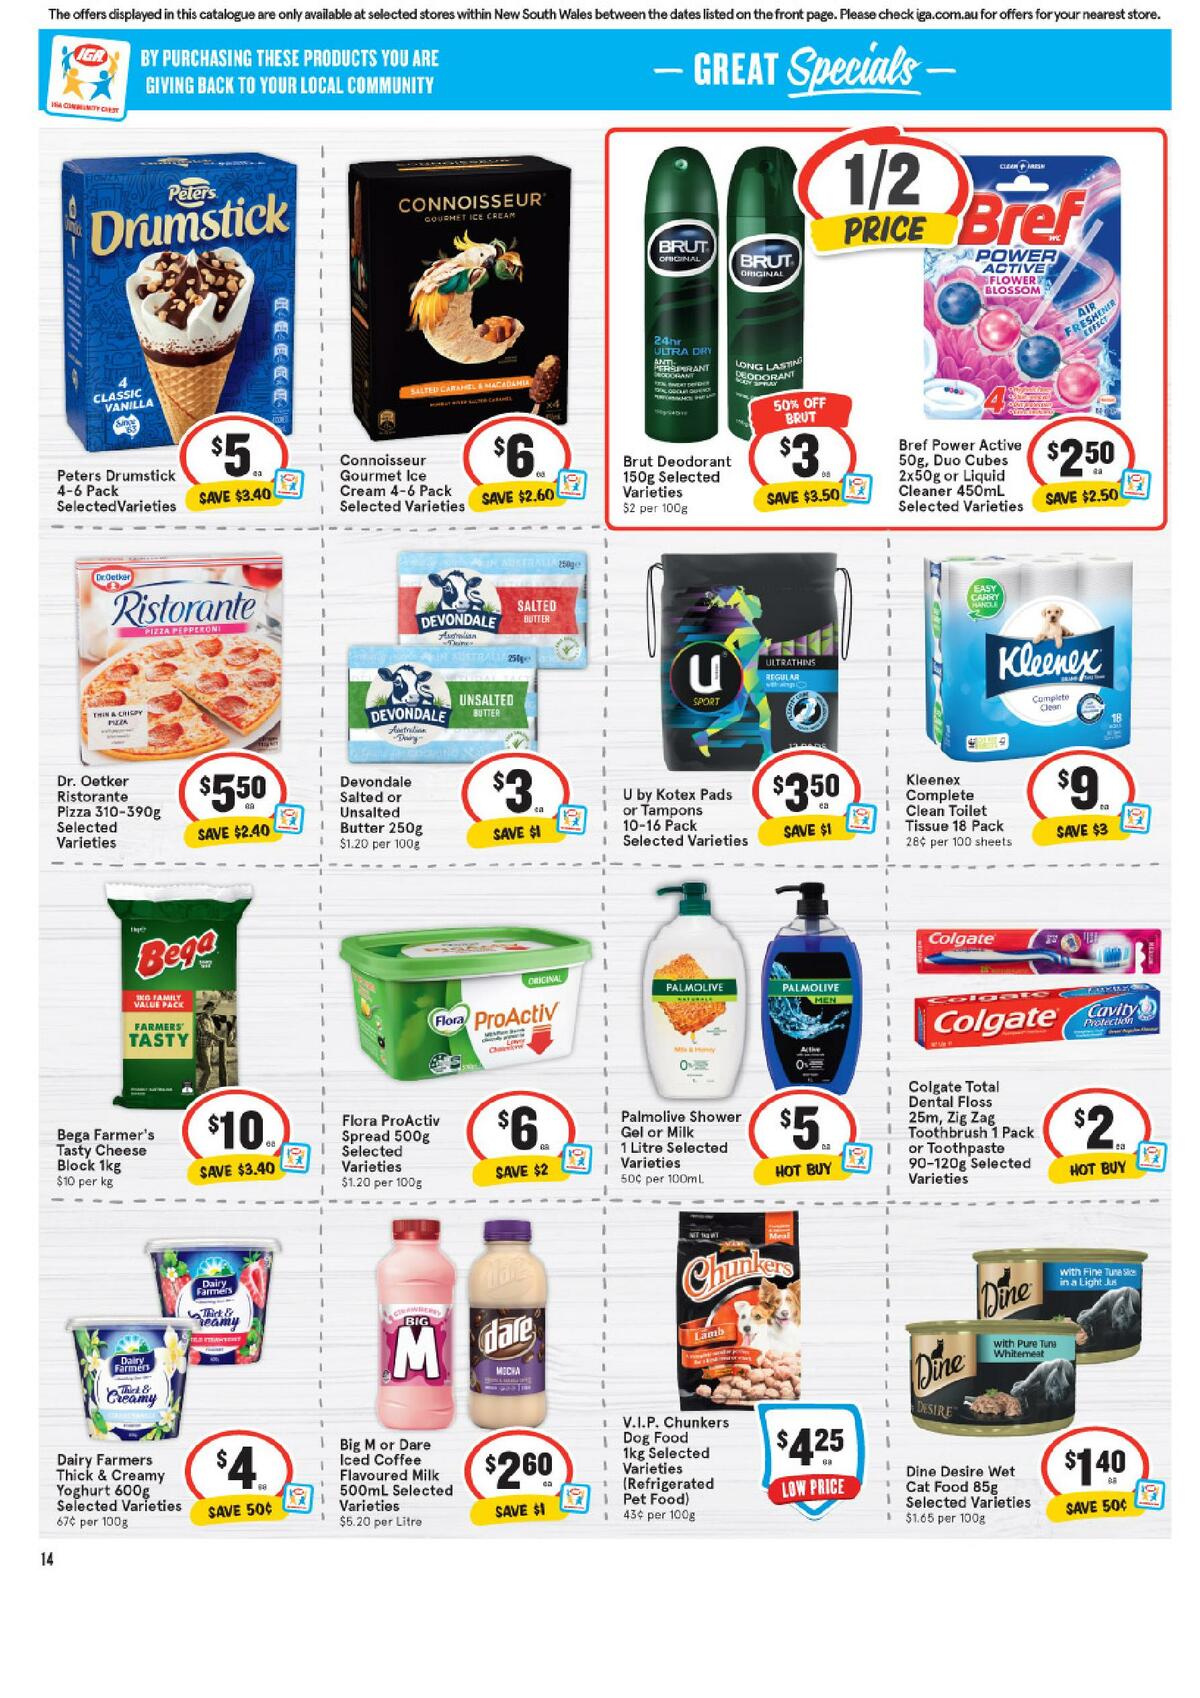 IGA Catalogues from 11 August